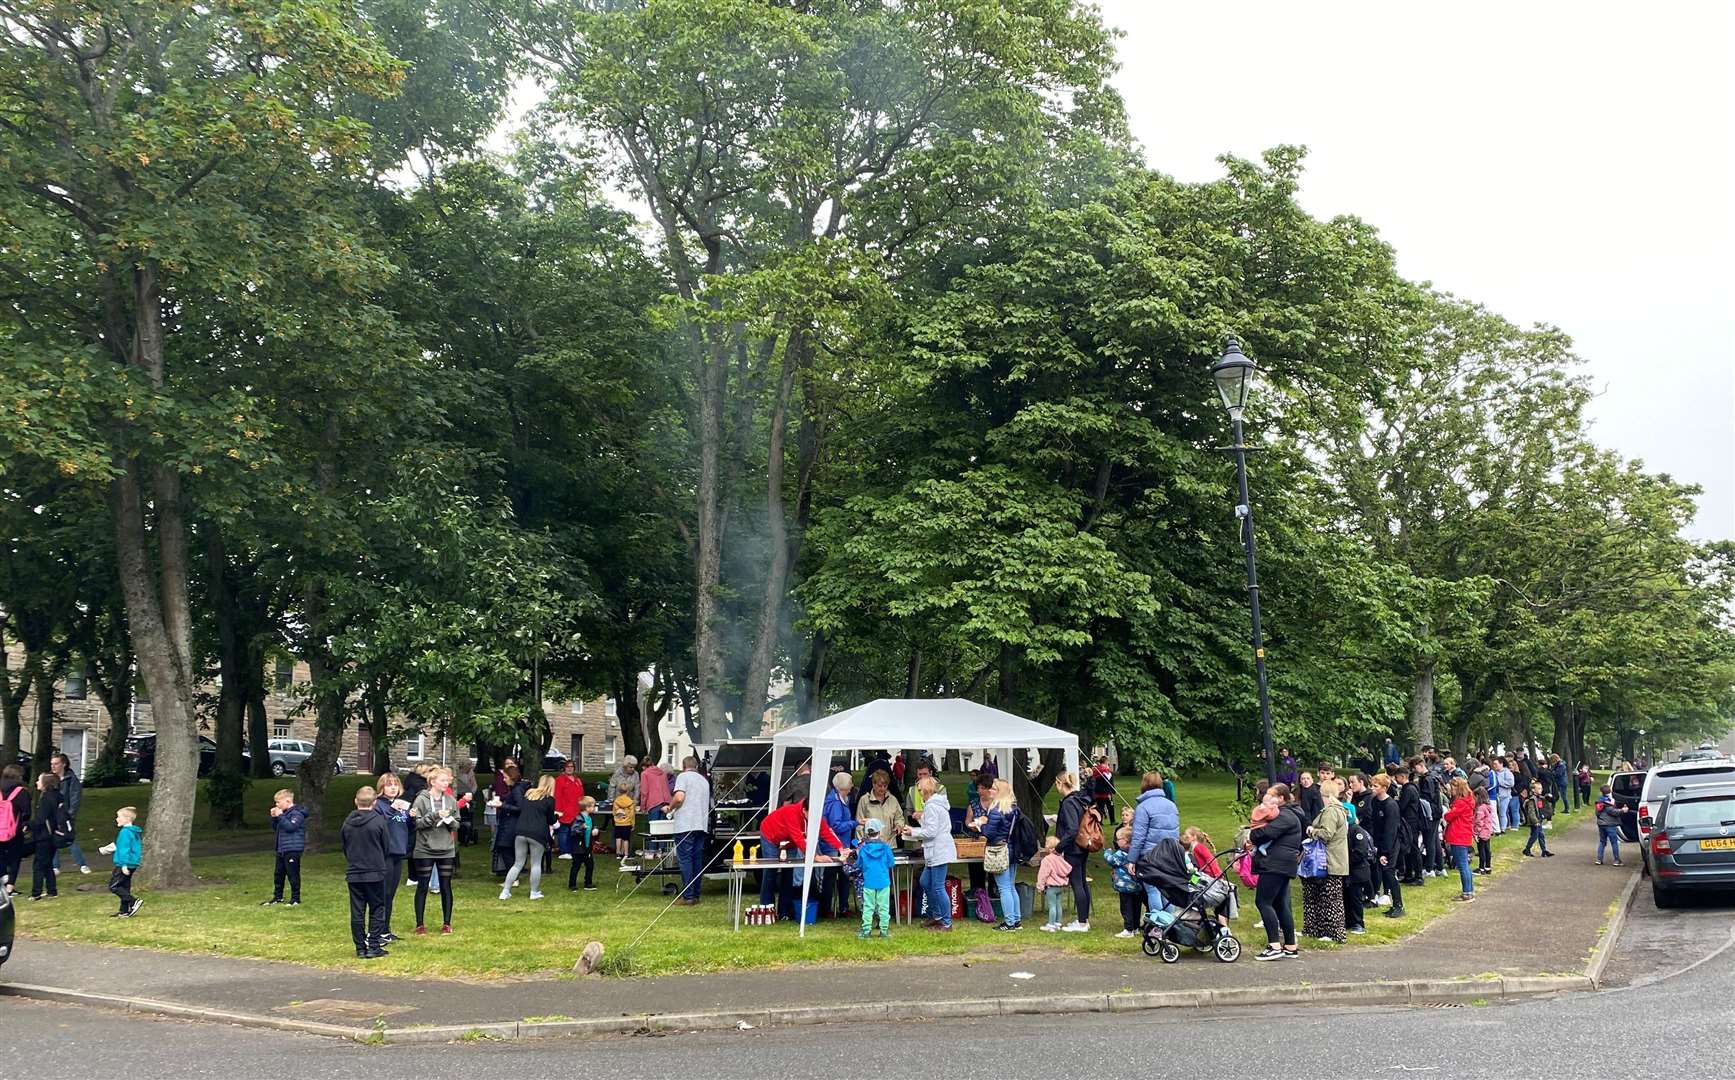 The barbecue in Argyle Square made a good start to the school holidays for Wick pupils.